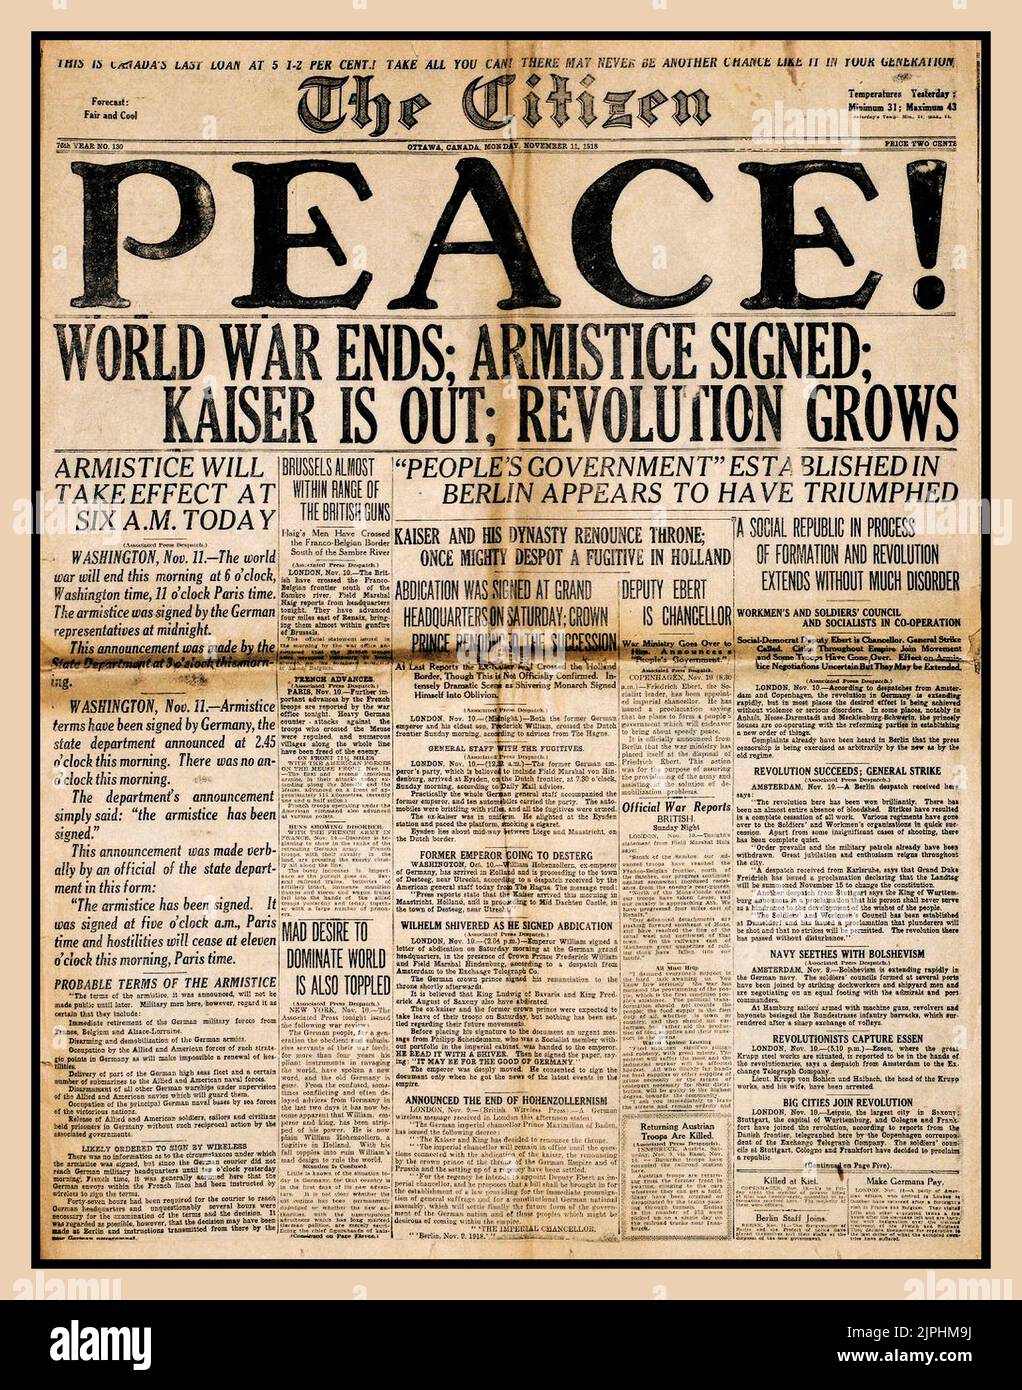 PEACE WW1 Ends. Newspapaper headline 'PEACE' dated November 11th 1918  The Citizen newspaper sums up the prayers of millions after a grinding war of attrition with huge loss of life World War I The Great War First World War Stock Photo